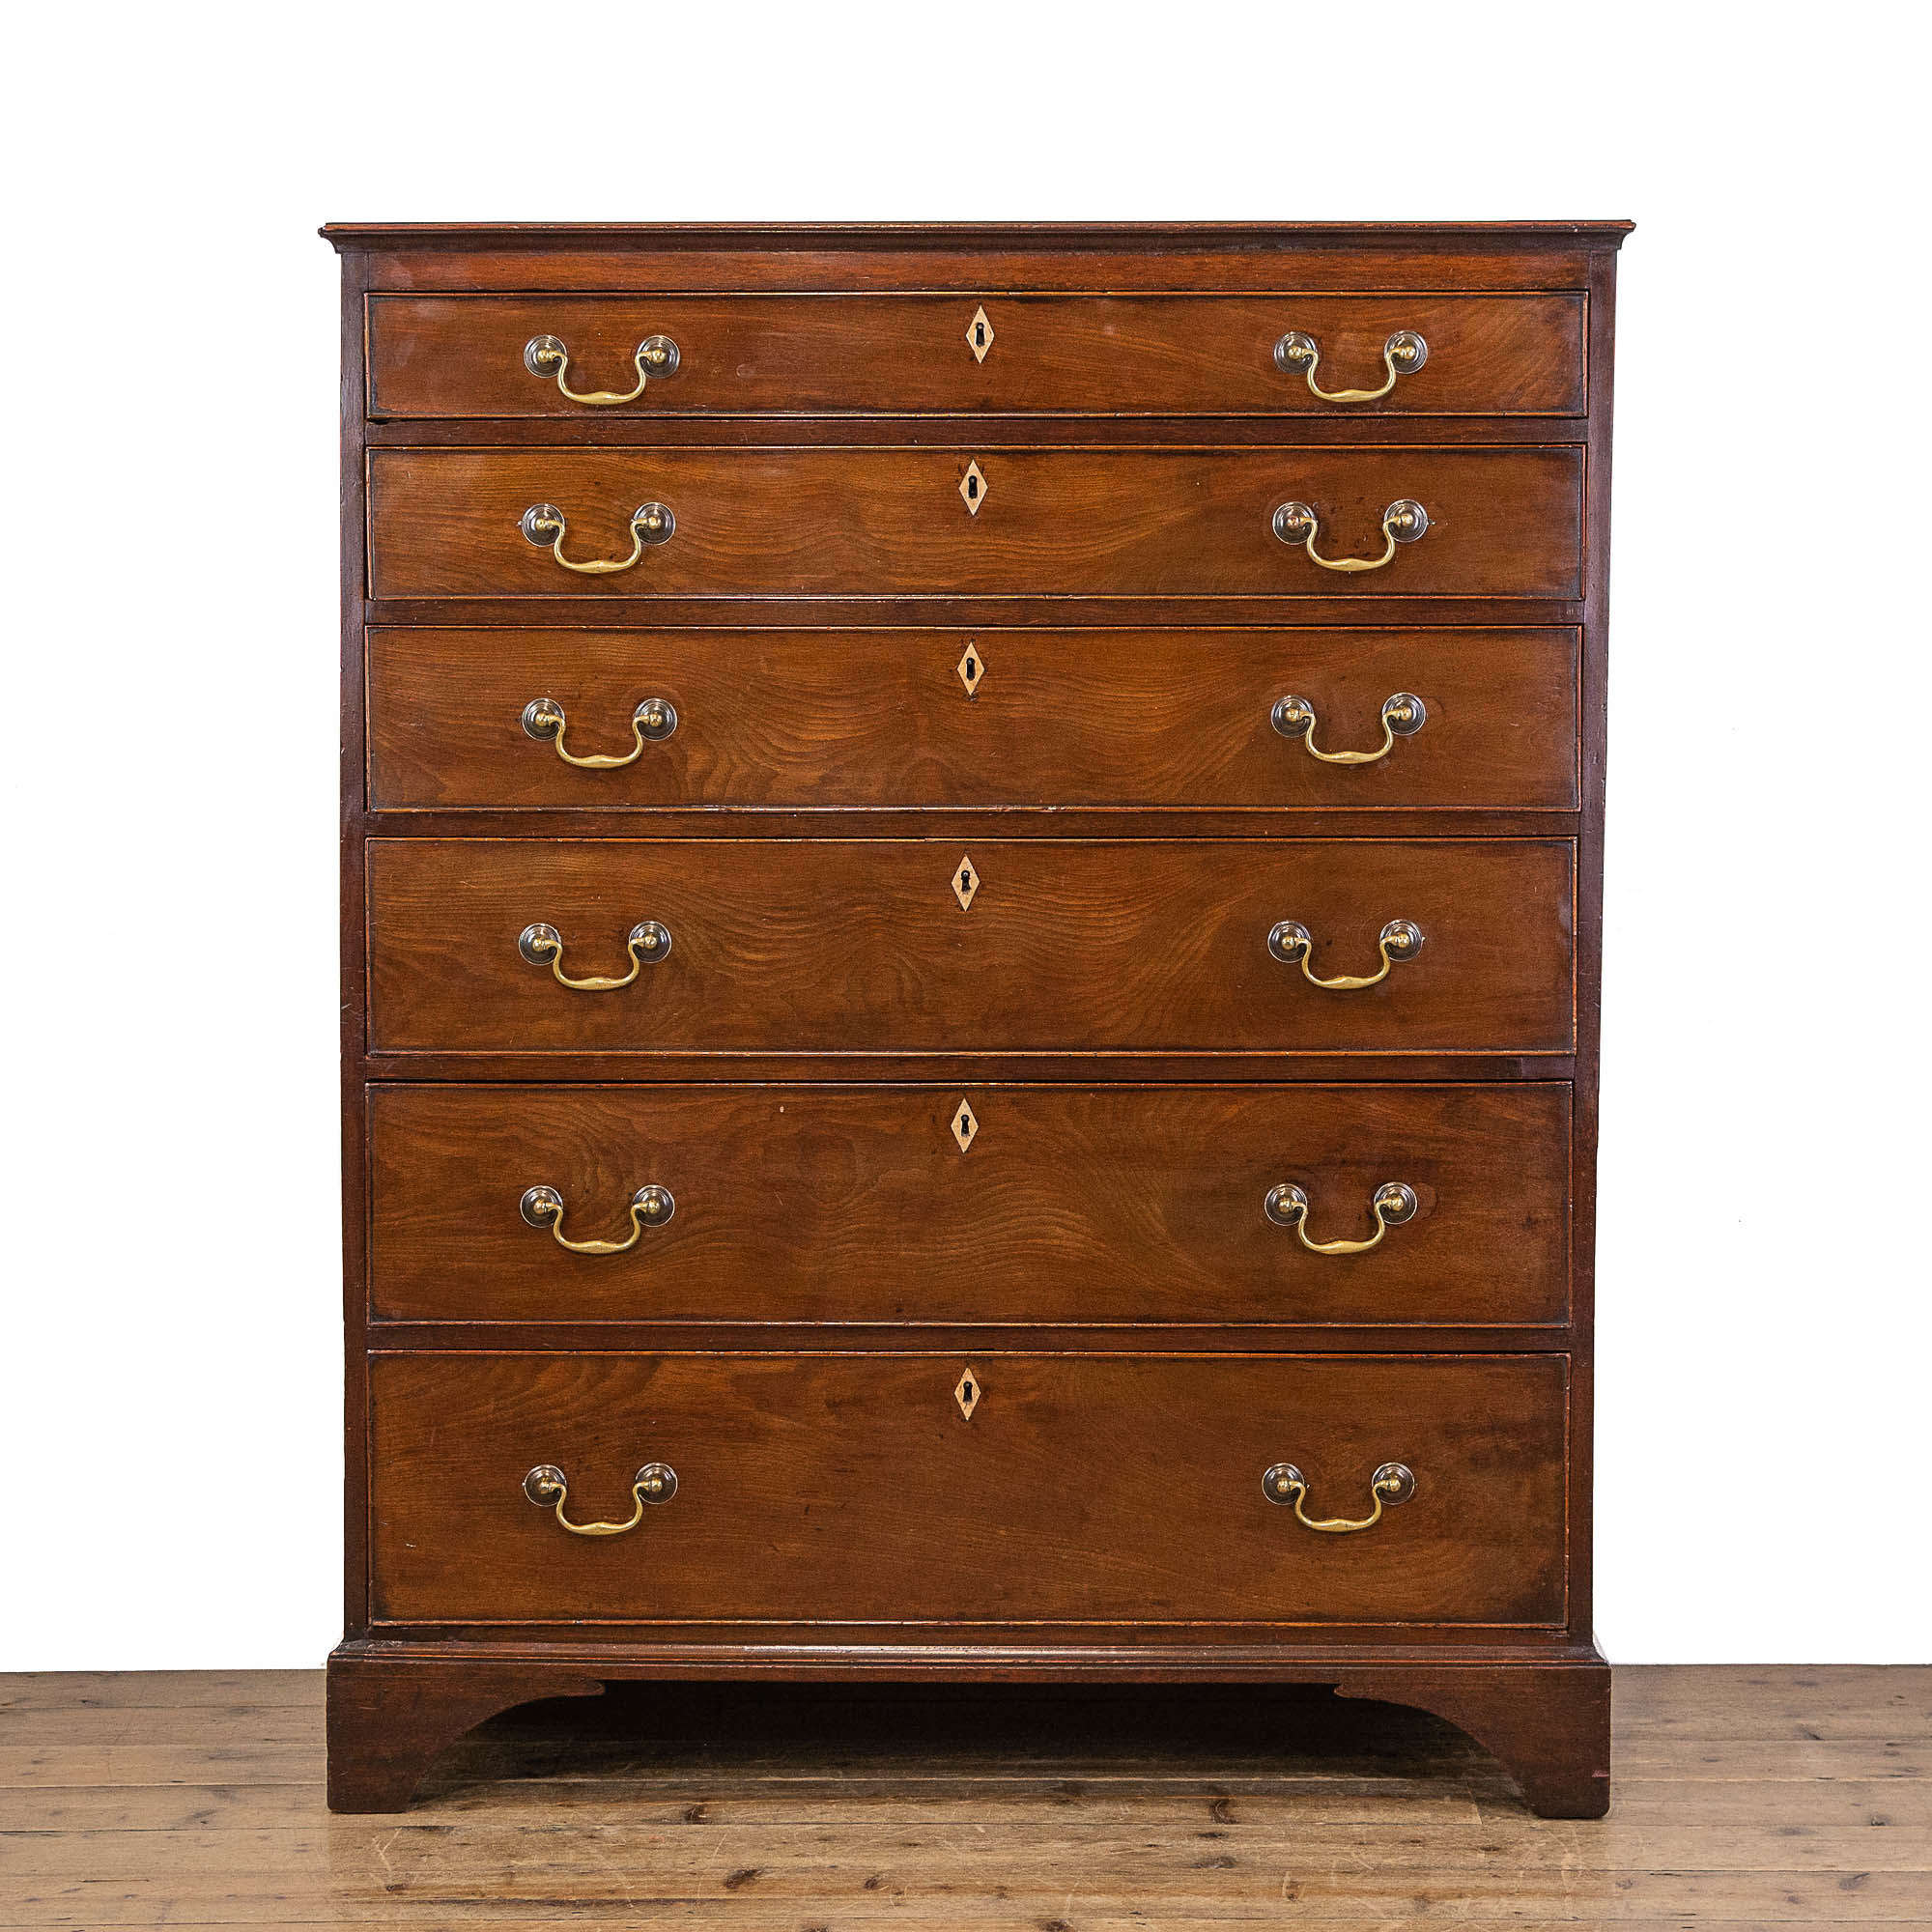 18th Century Antique Mahogany Chest of Drawers